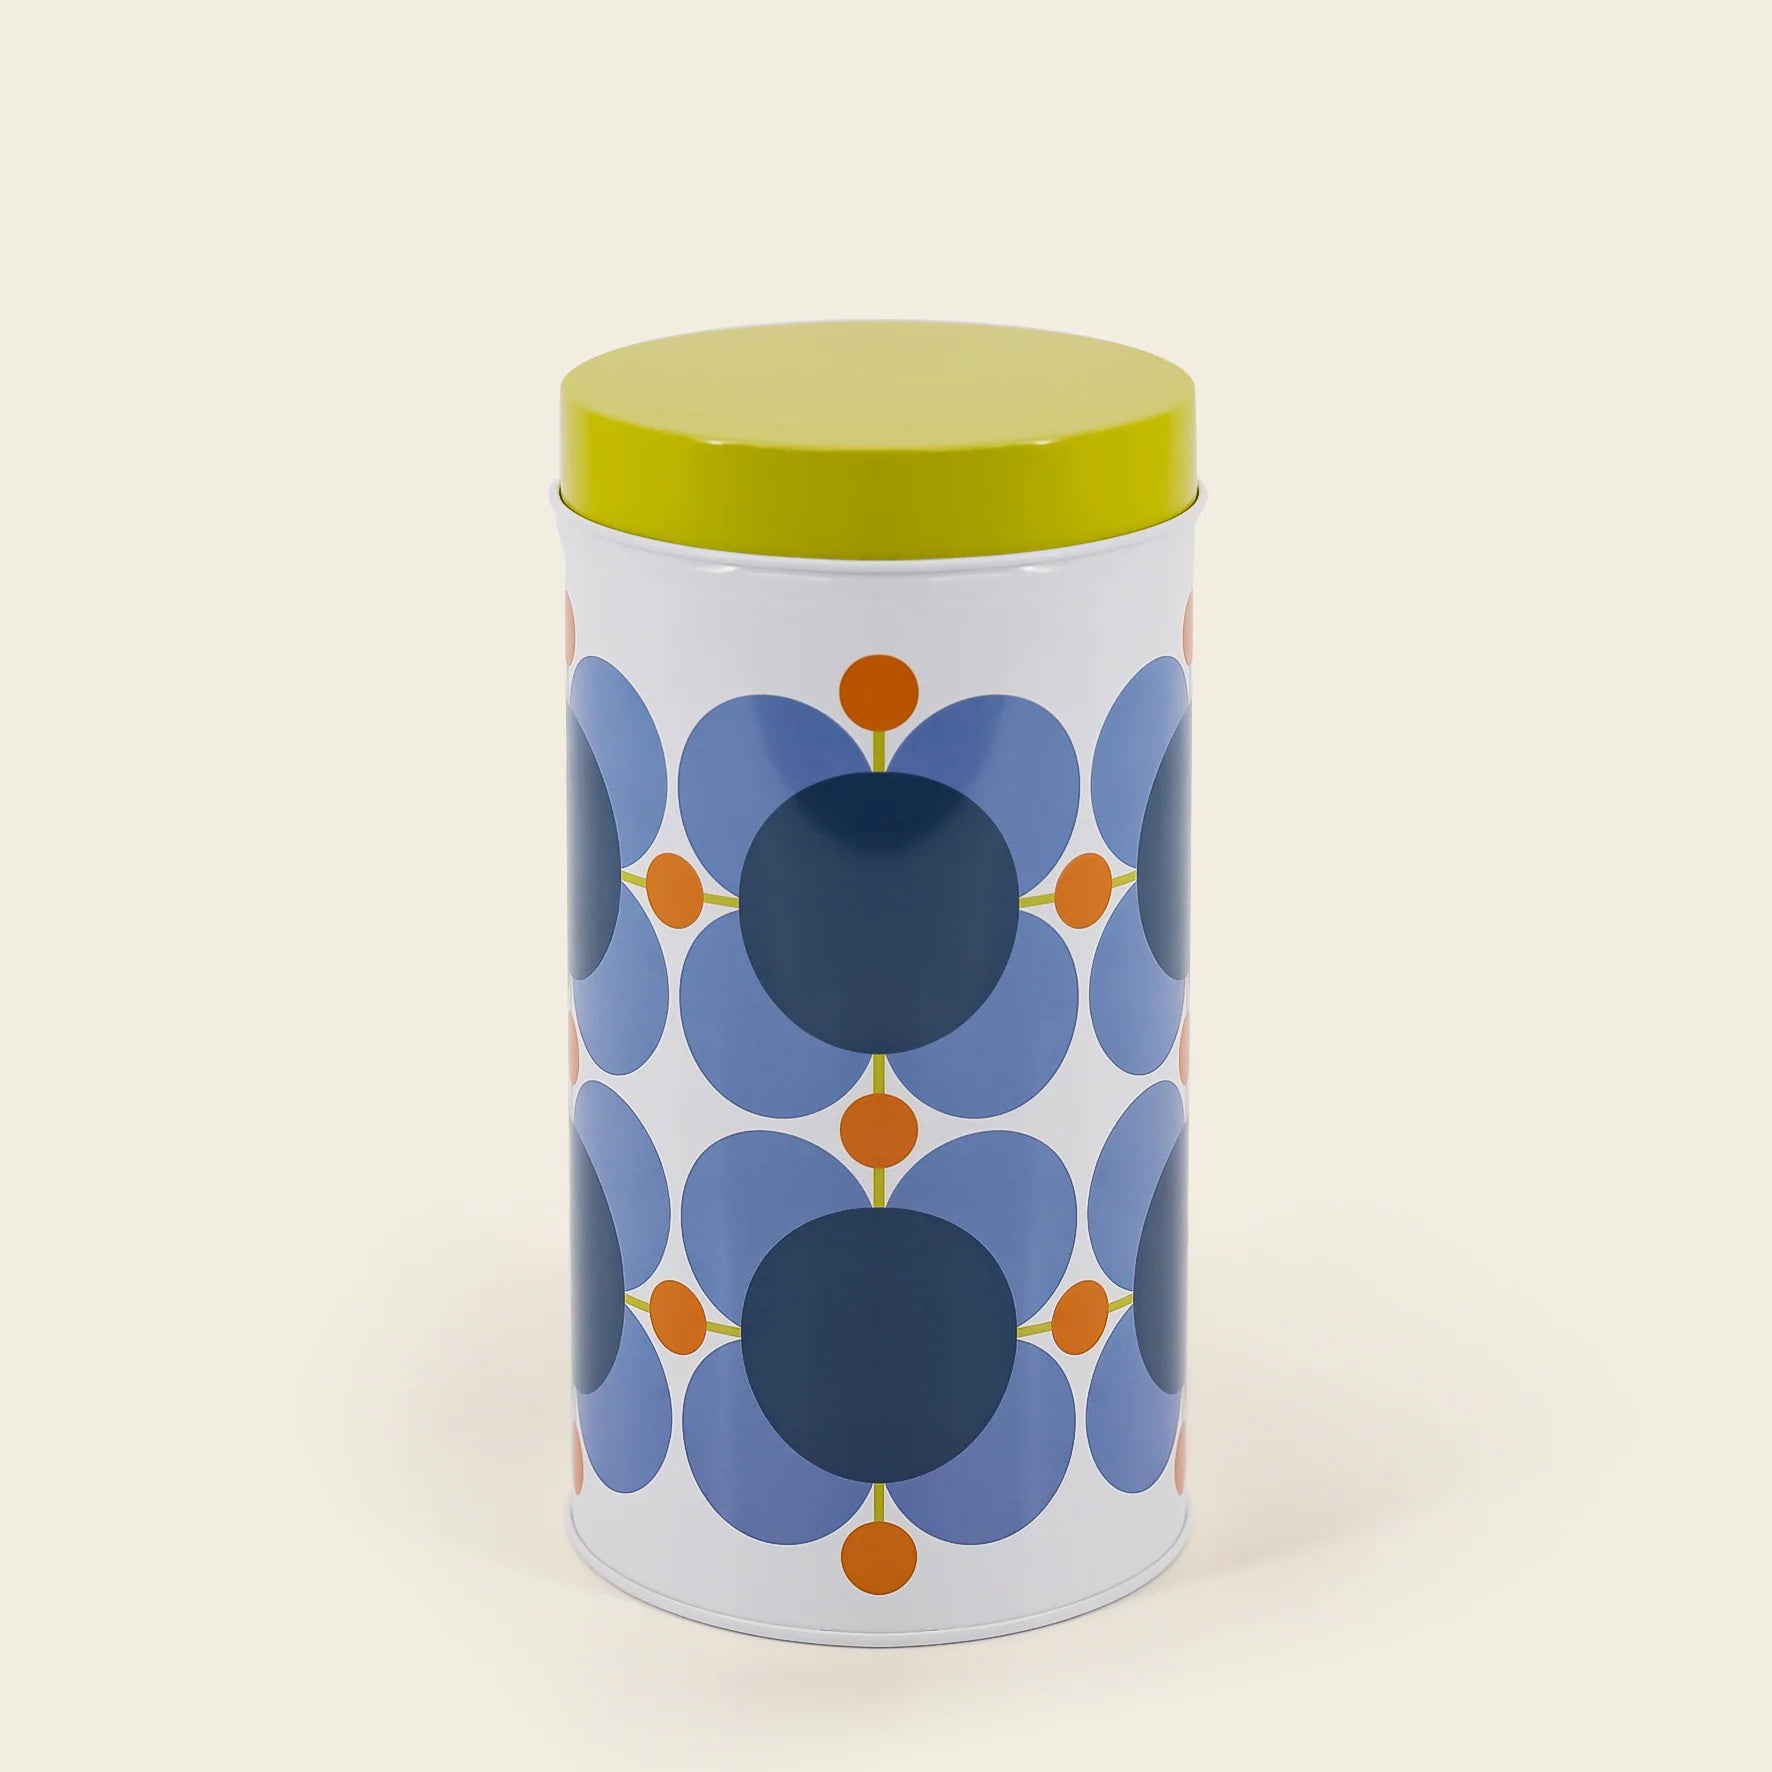 Fab Gifts | Orla Kiely Atomic Flower Nesting Cake Tins Set Of 3 by Weirs of Baggot Street